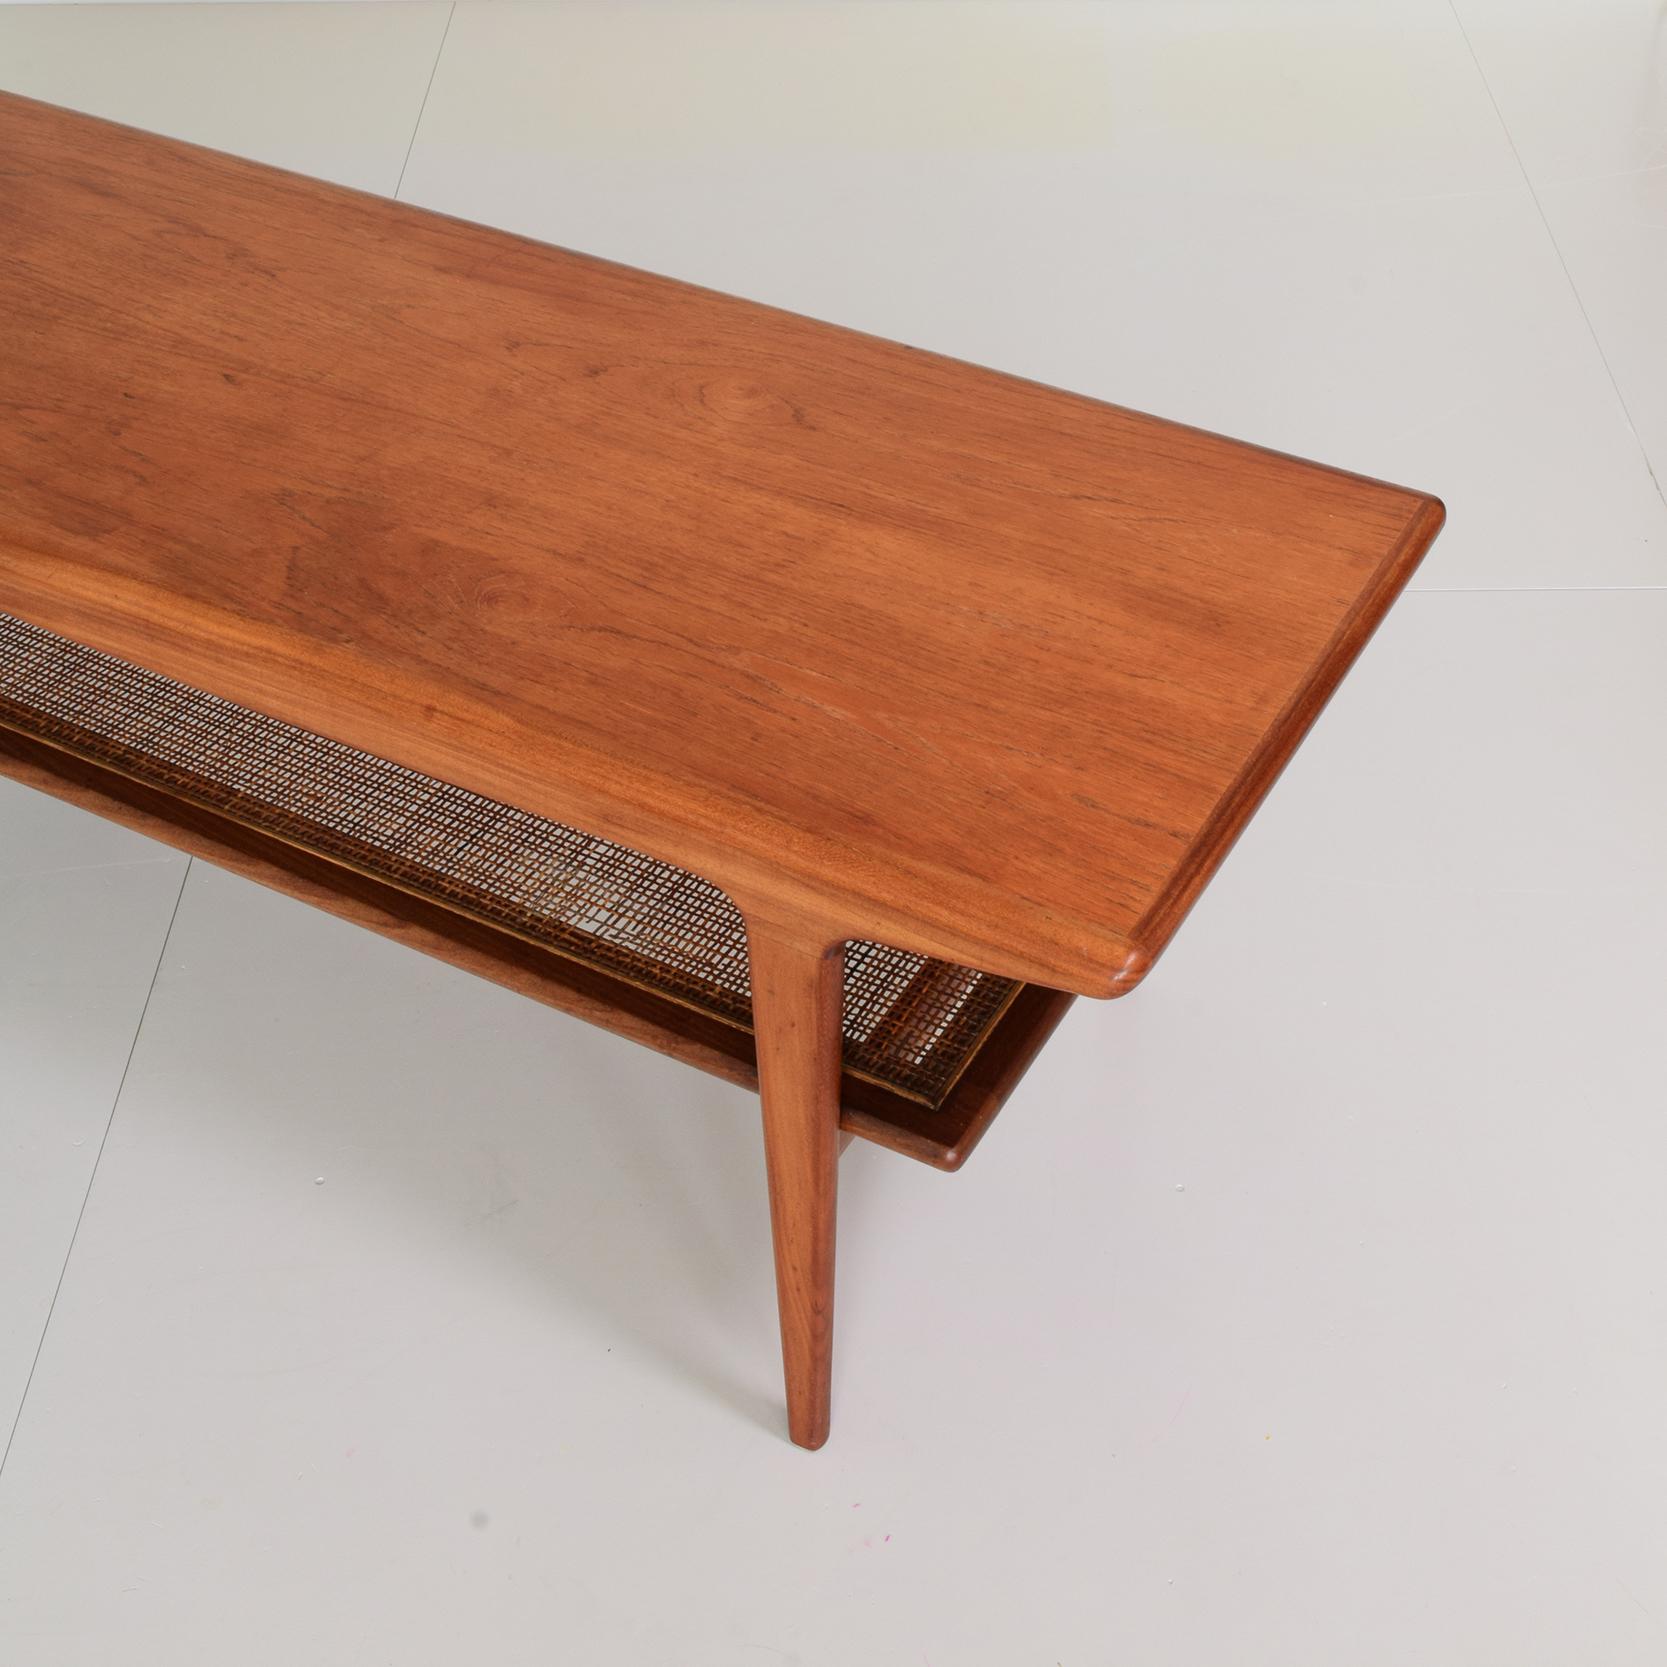 British John Herbert for Younger, Mid Century Danish Style Teak and Cane Coffee Table